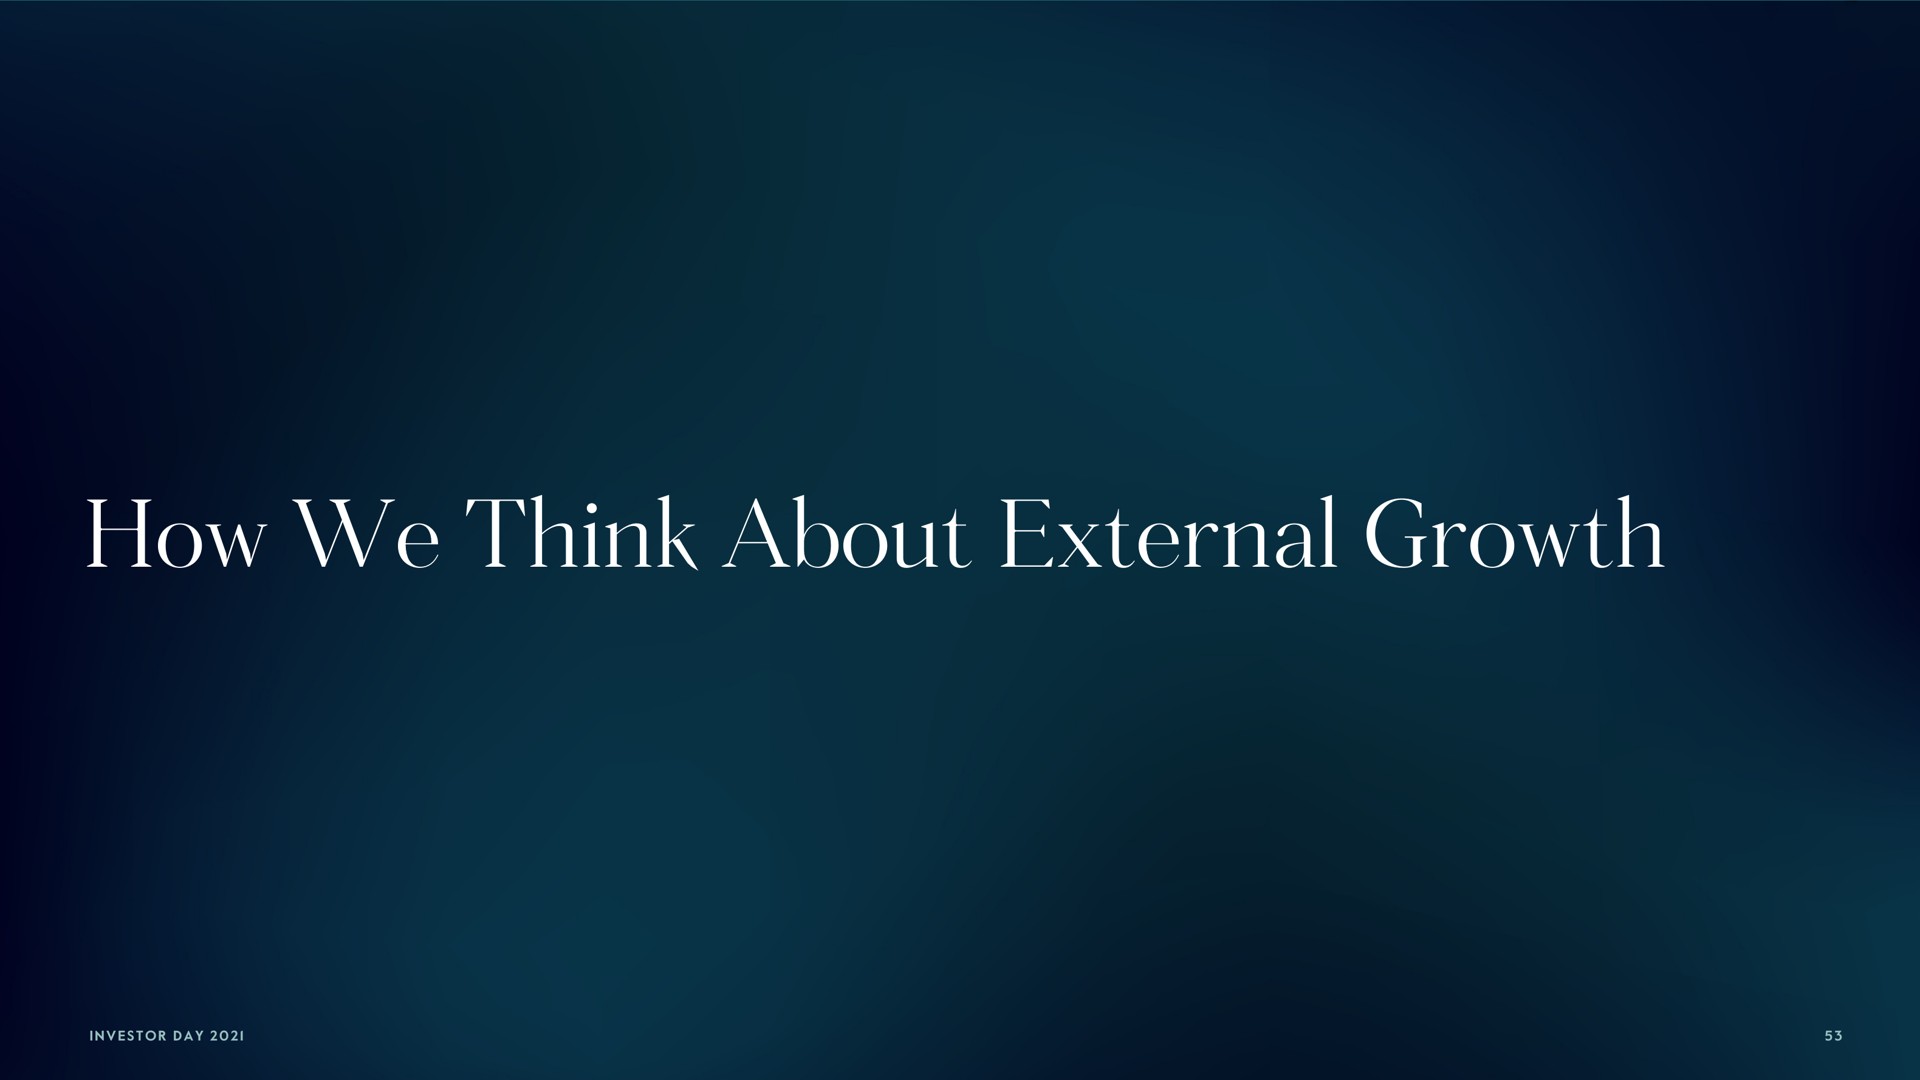 how we think about external growth | Carlyle